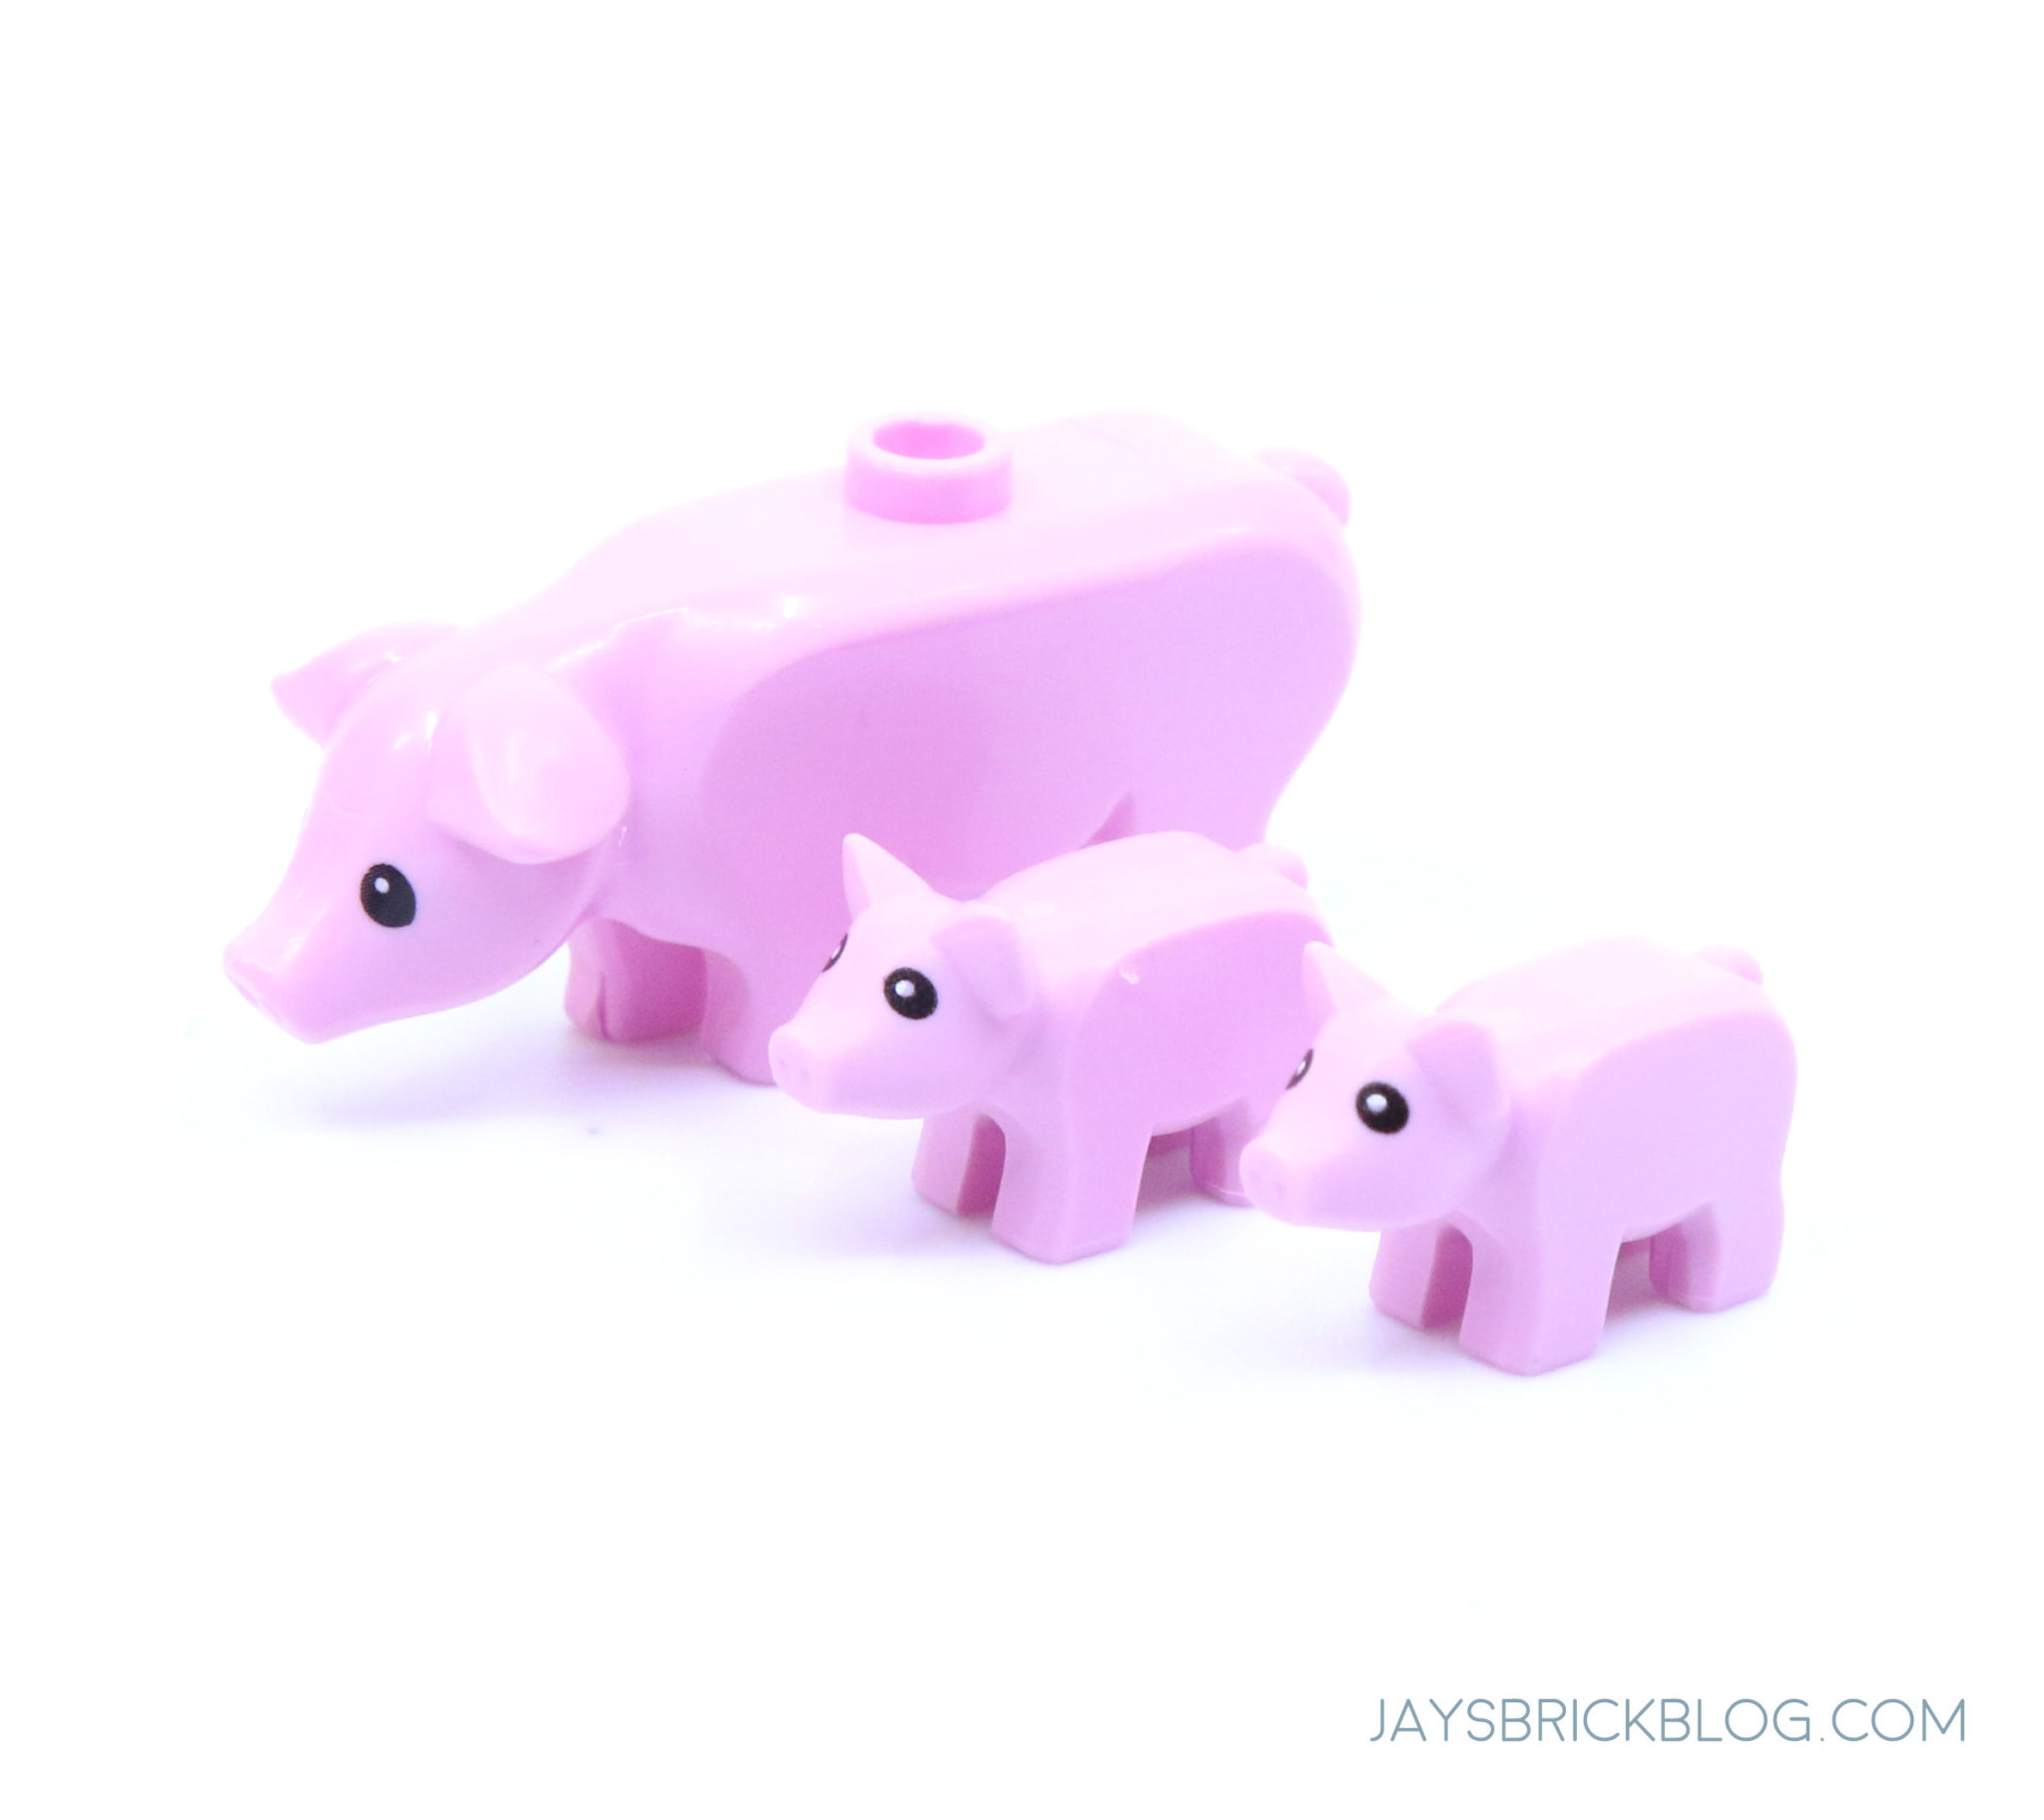 LEGO Pick a Brick November restock: Piglets, Forestmen, Cows, and more ...